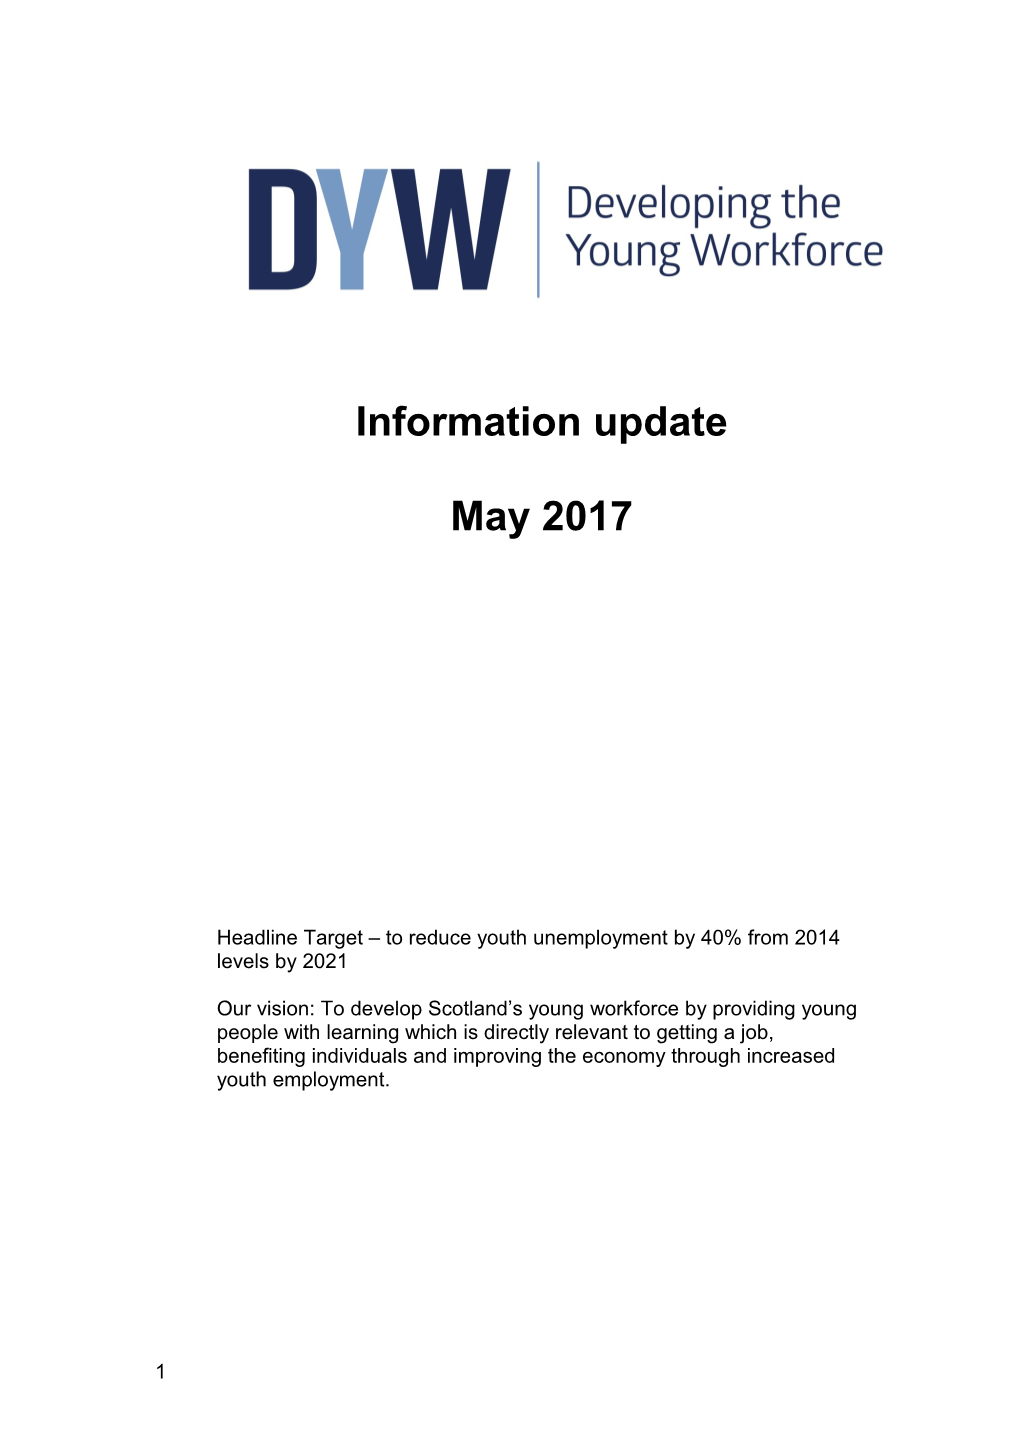 Word File: Developing the Young Workforce - Information Update - May 2017